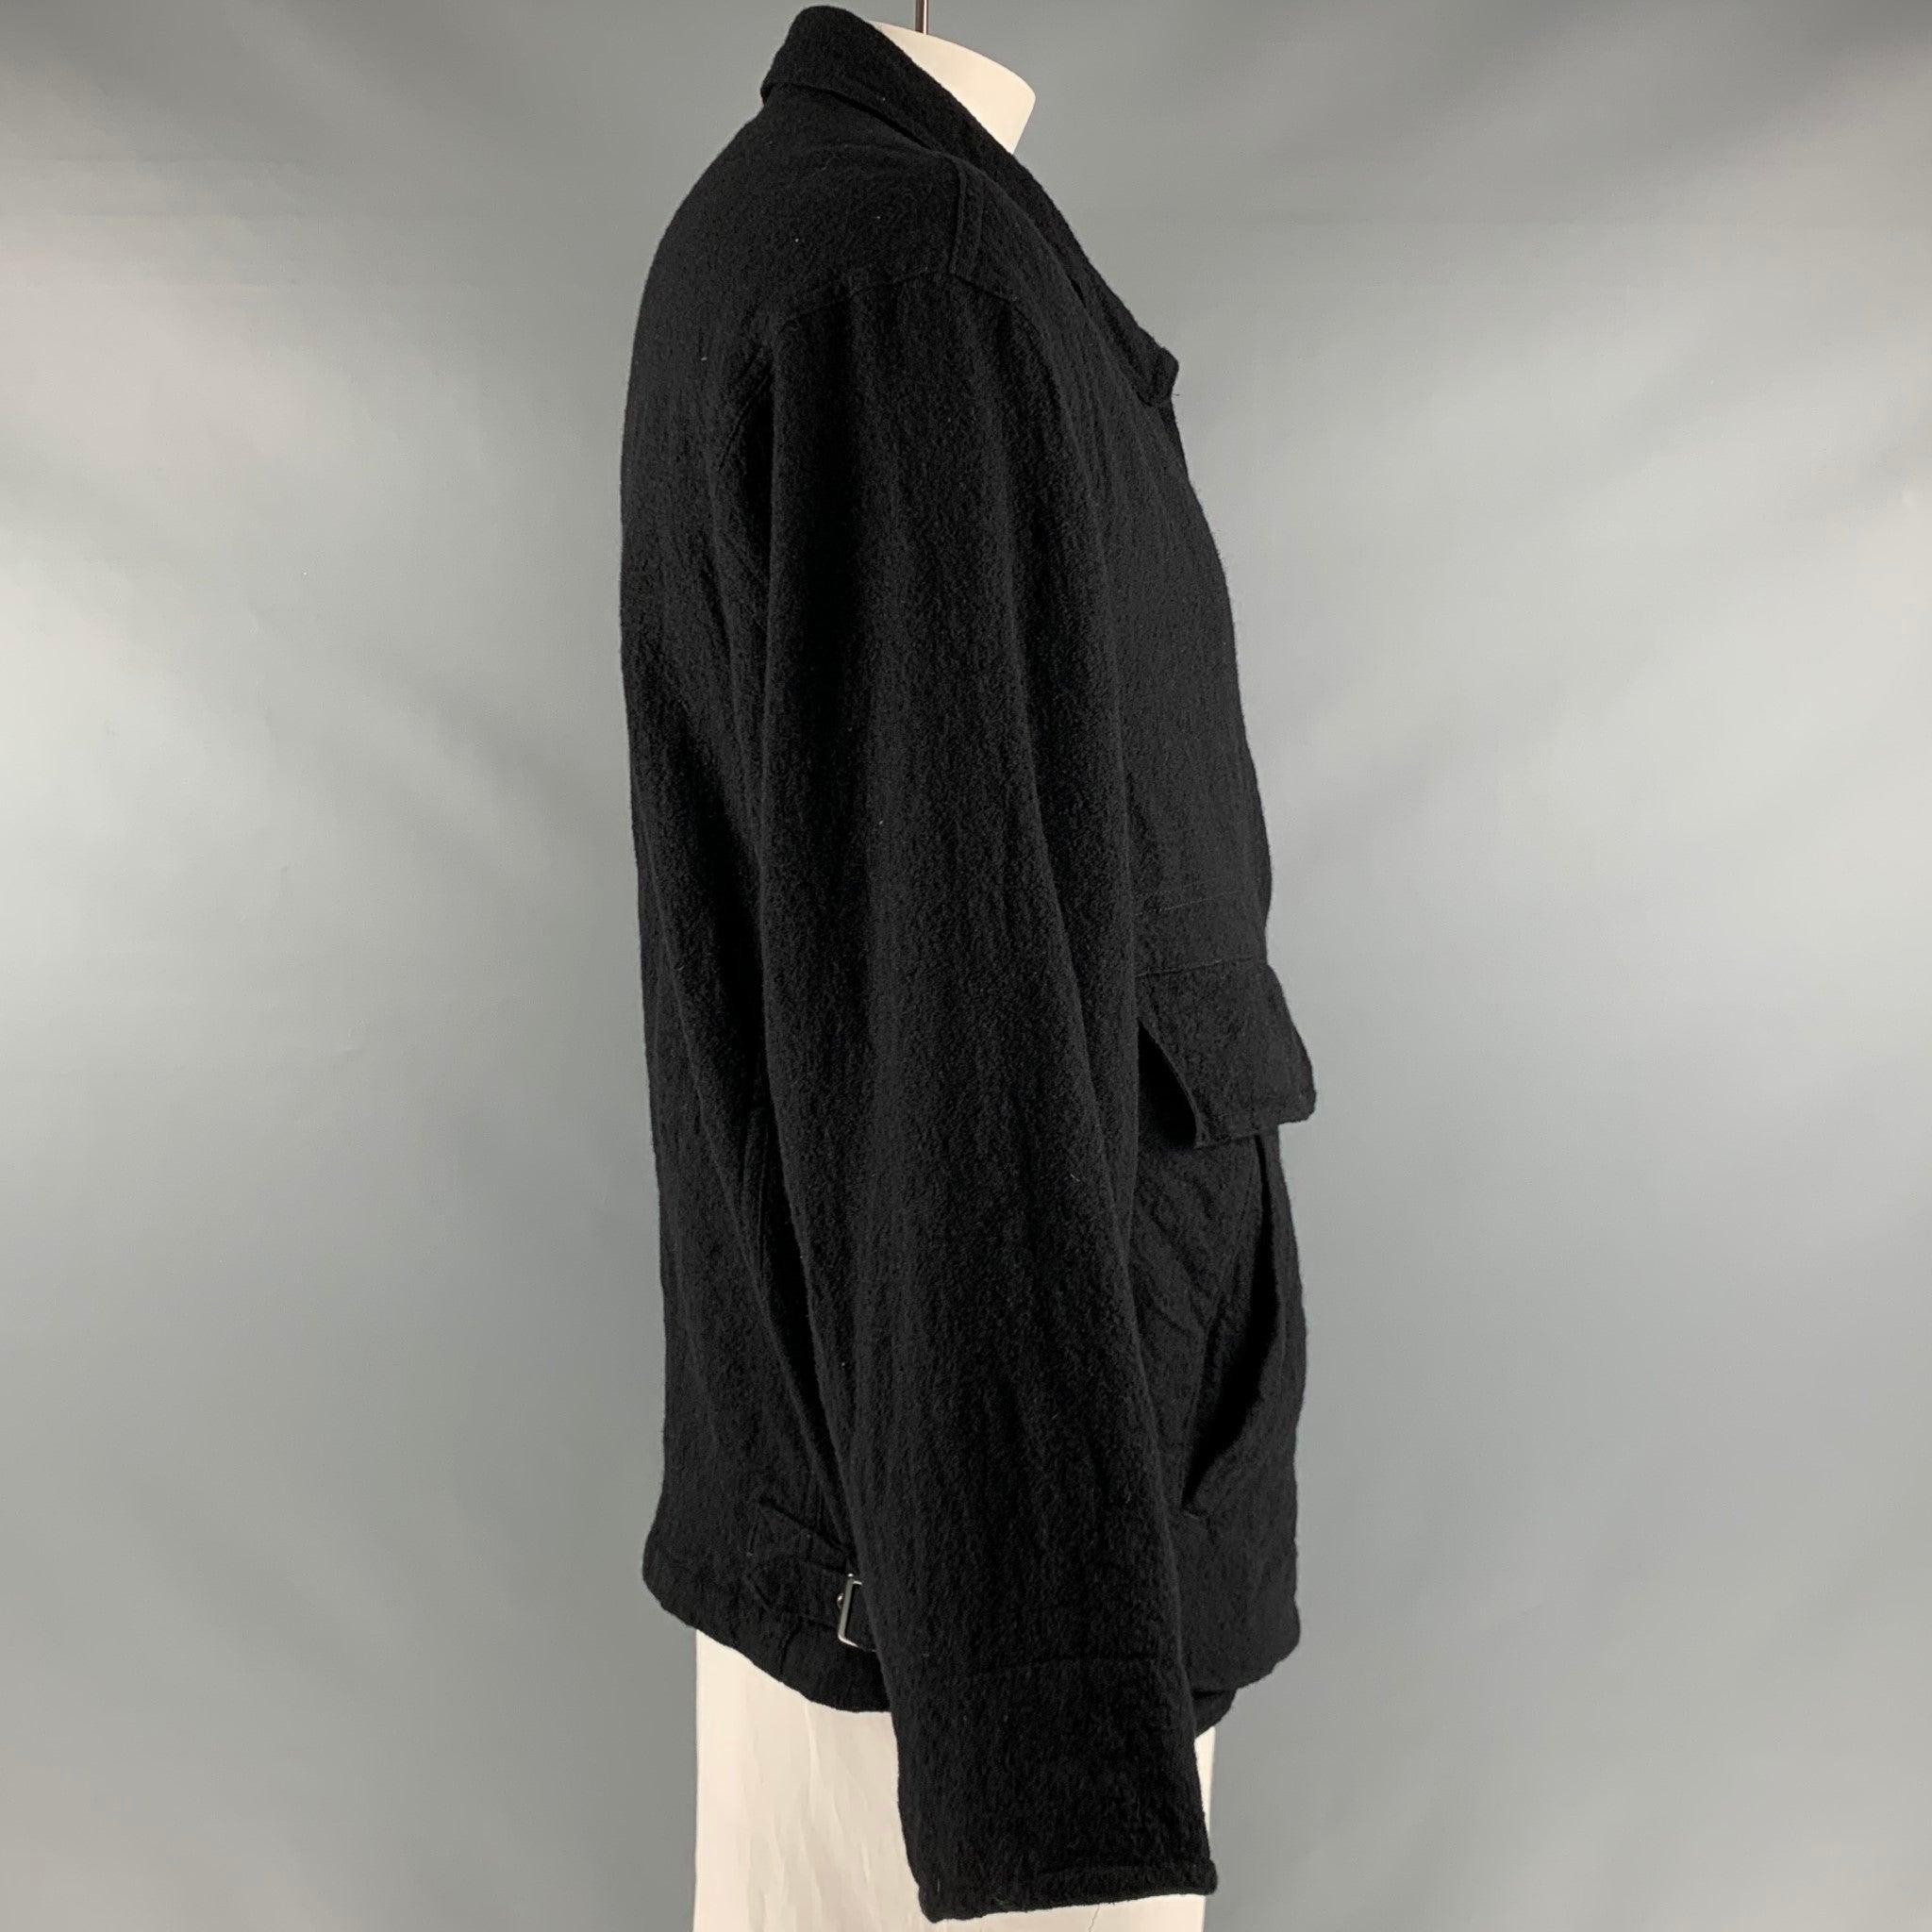 YOHJI YAMAMOTO PRODUCE
jacket in a black wool fabric featuring four pockets and a zip up closure. Made in Japan. Good Pre-Owned Condition. Moderate signs of wear. 

Marked:   3 

Measurements: 
 
Shoulder: 20 inches  Chest: 42 inches  Sleeve: 23.5